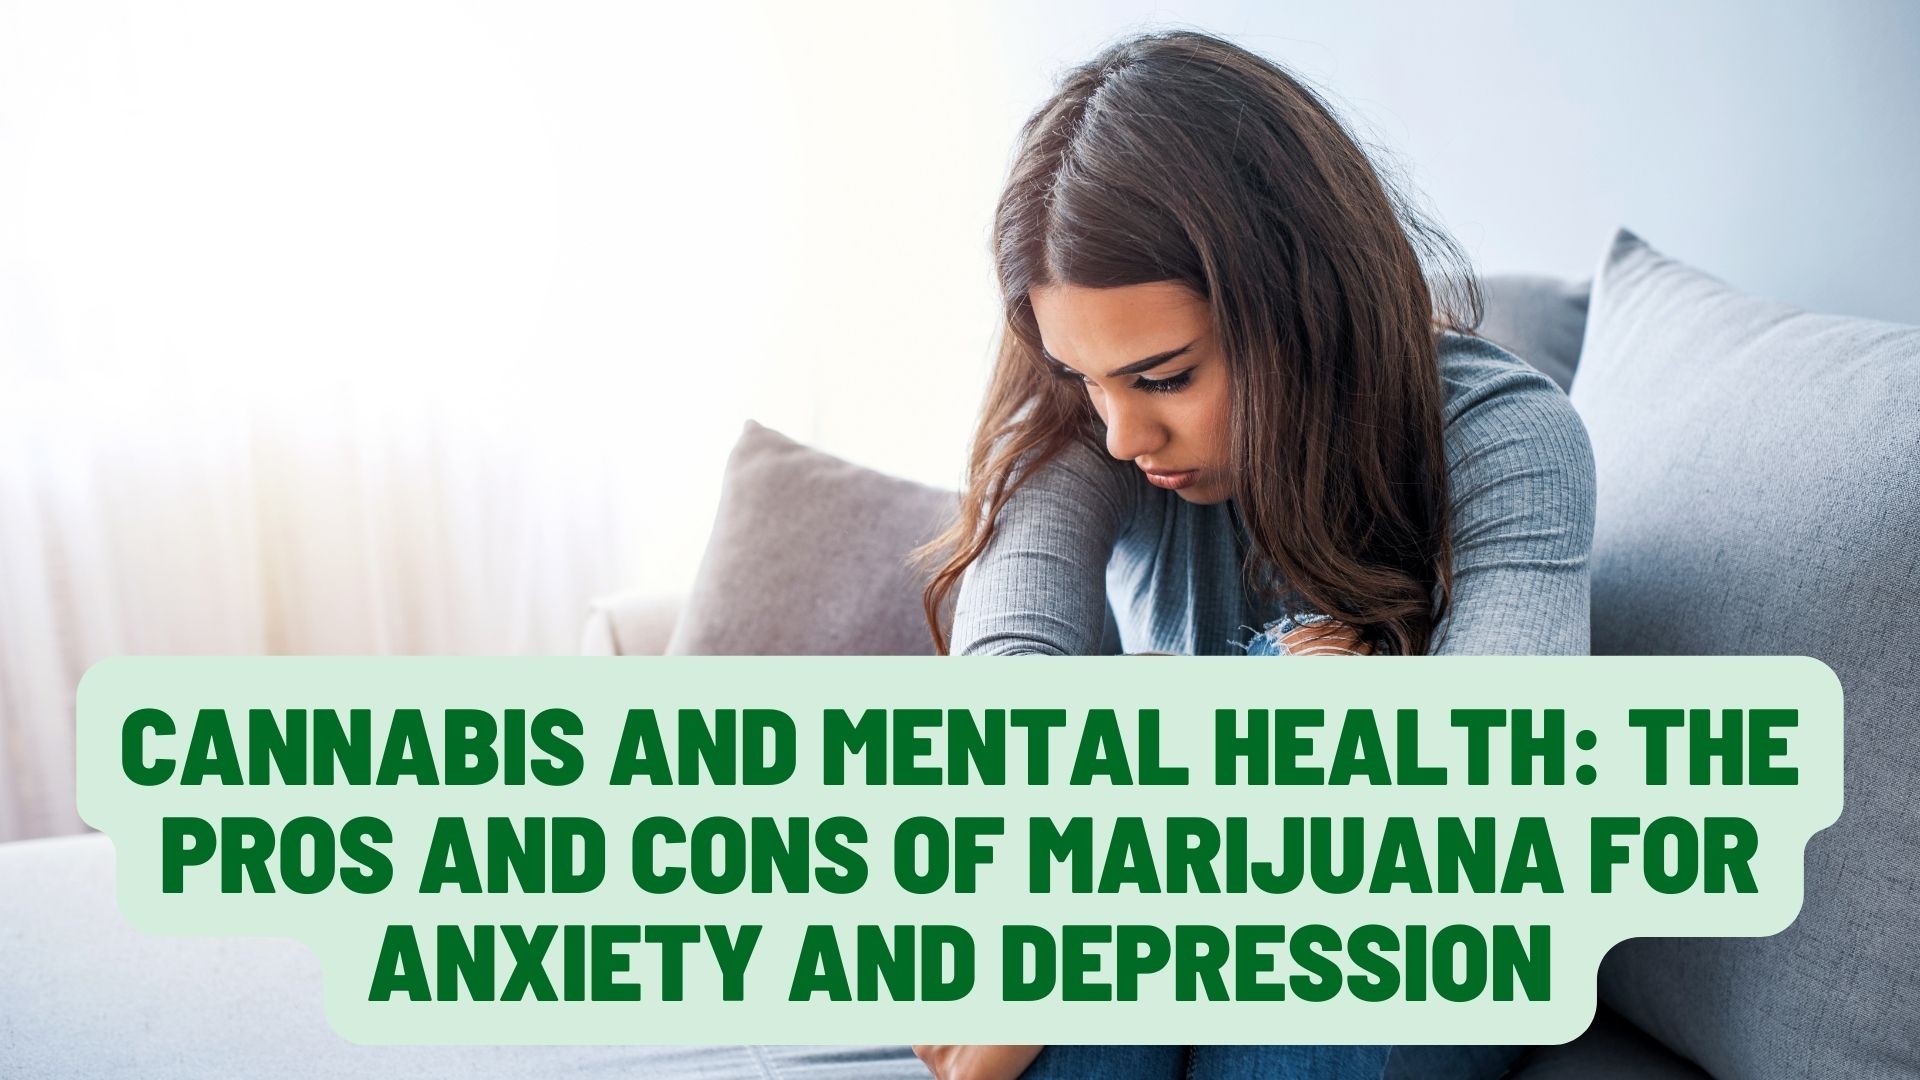 Cannabis and Mental Health: The Pros and Cons of Marijuana for Anxiety and Depression